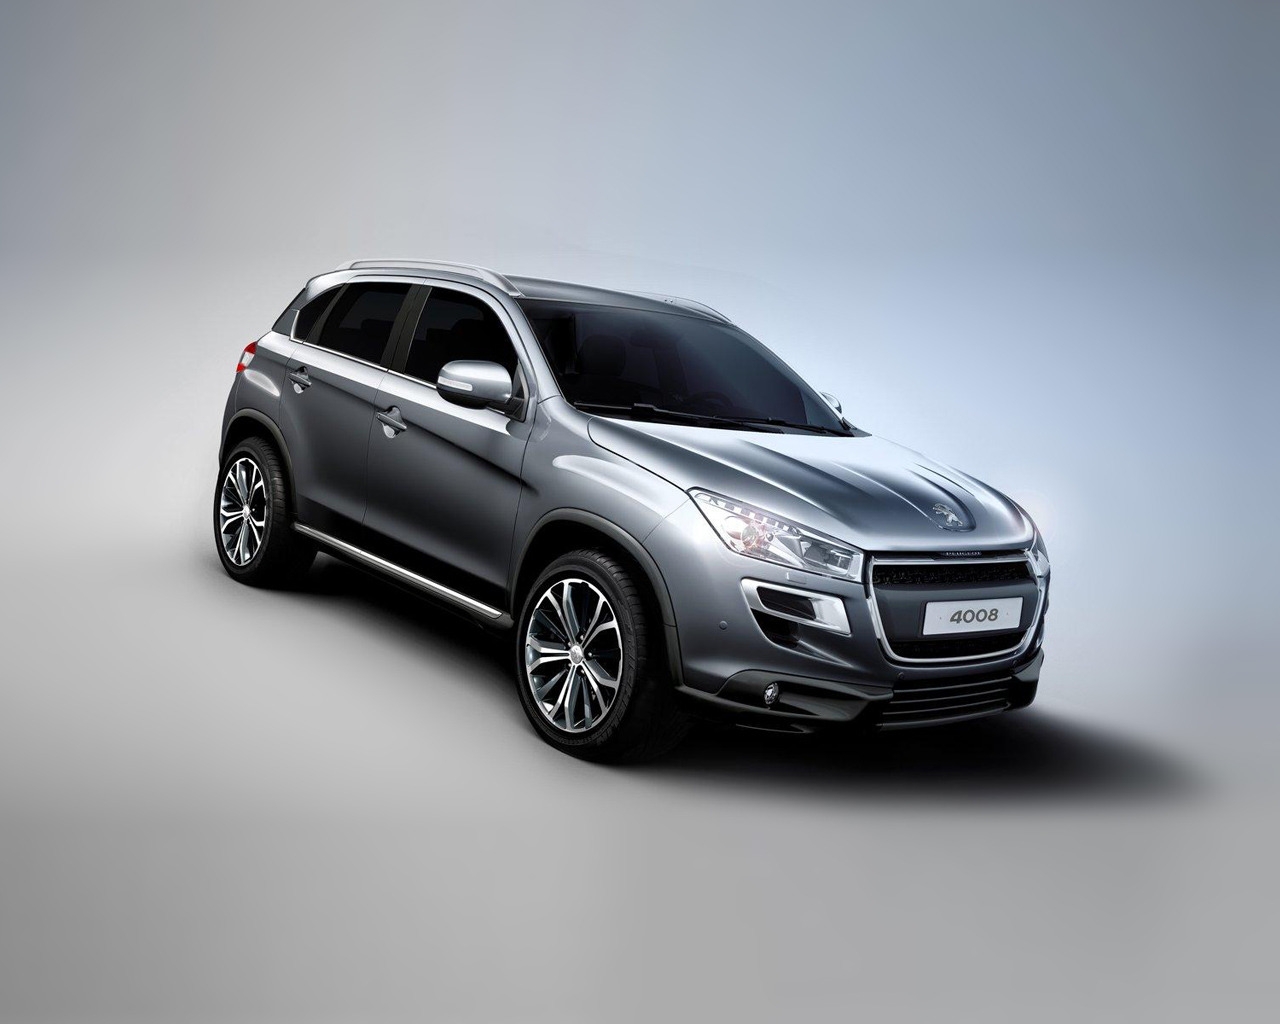 2012 Peugeot 4008 Grey for 1280 x 1024 resolution